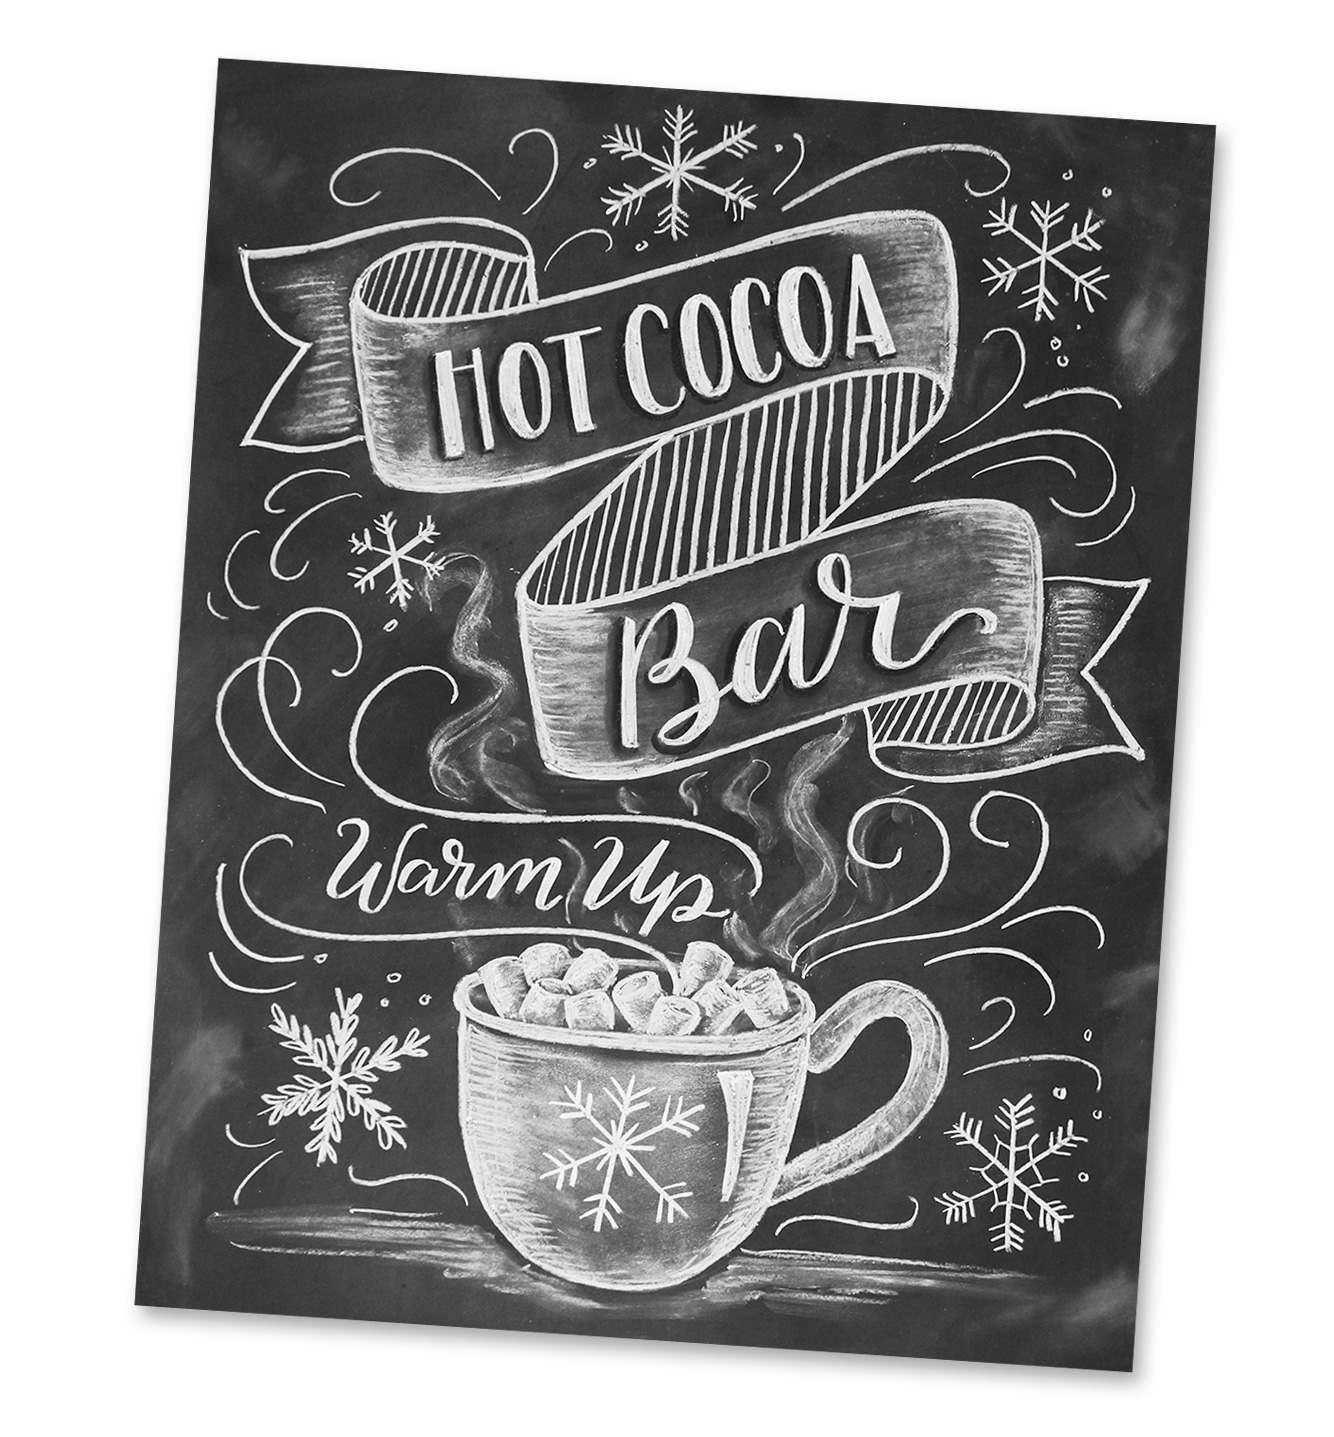 Chalk art DIY by Valerie McKeehan: Learn all the steps to make this cute hot cocoa bar chalkboard sign for your holiday parties